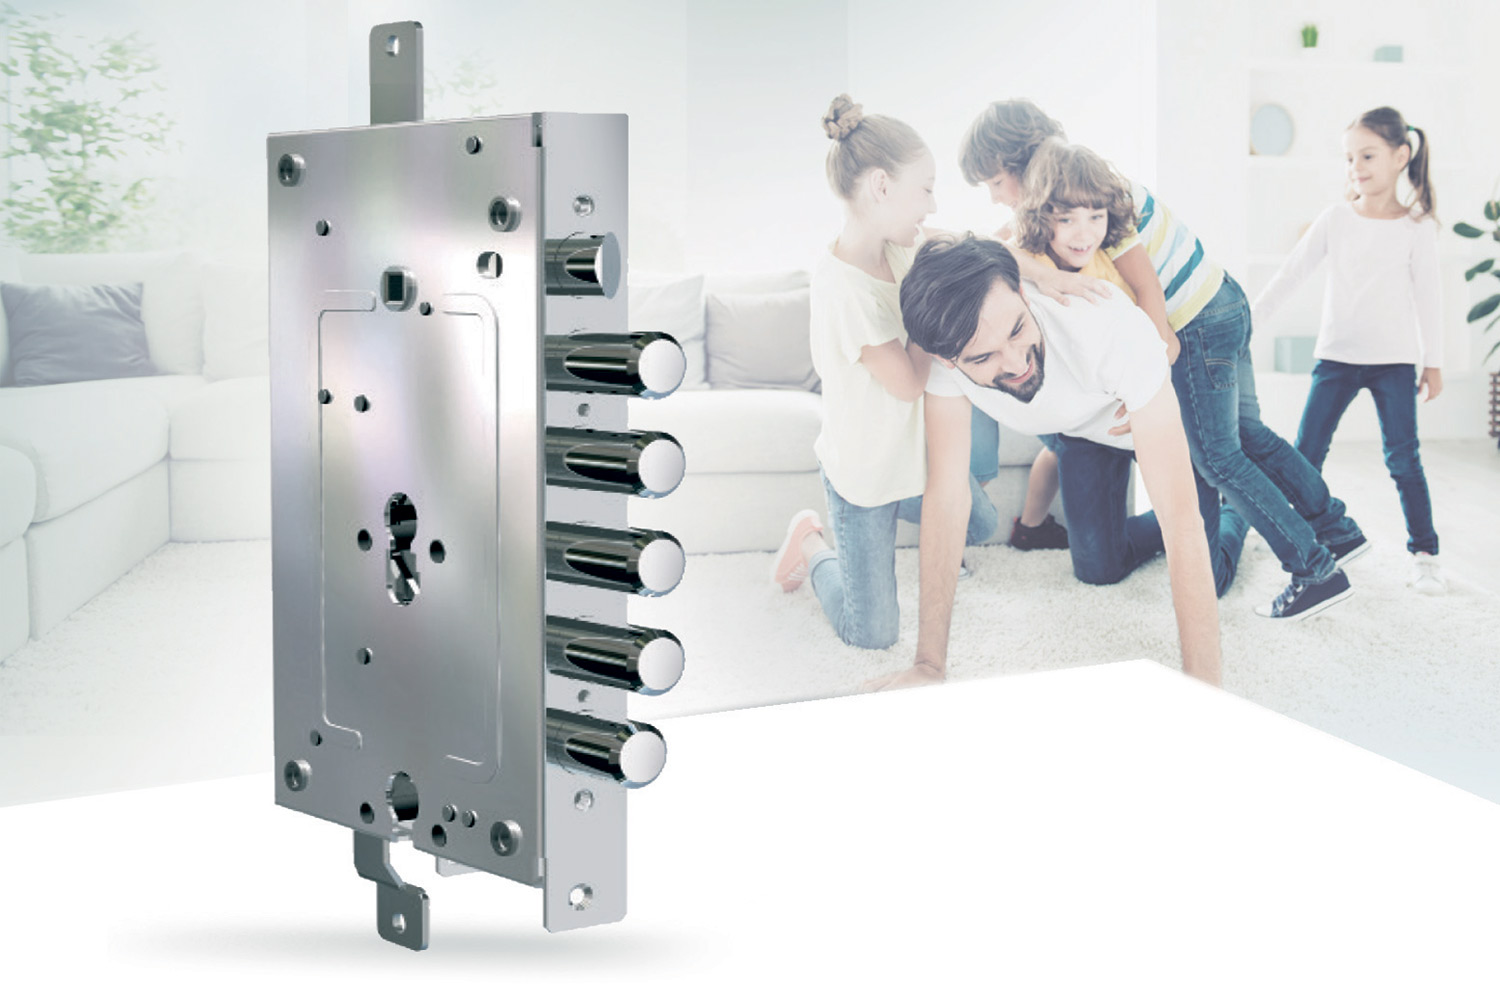 multi-function lock for armored door with a dad playing with children in the background